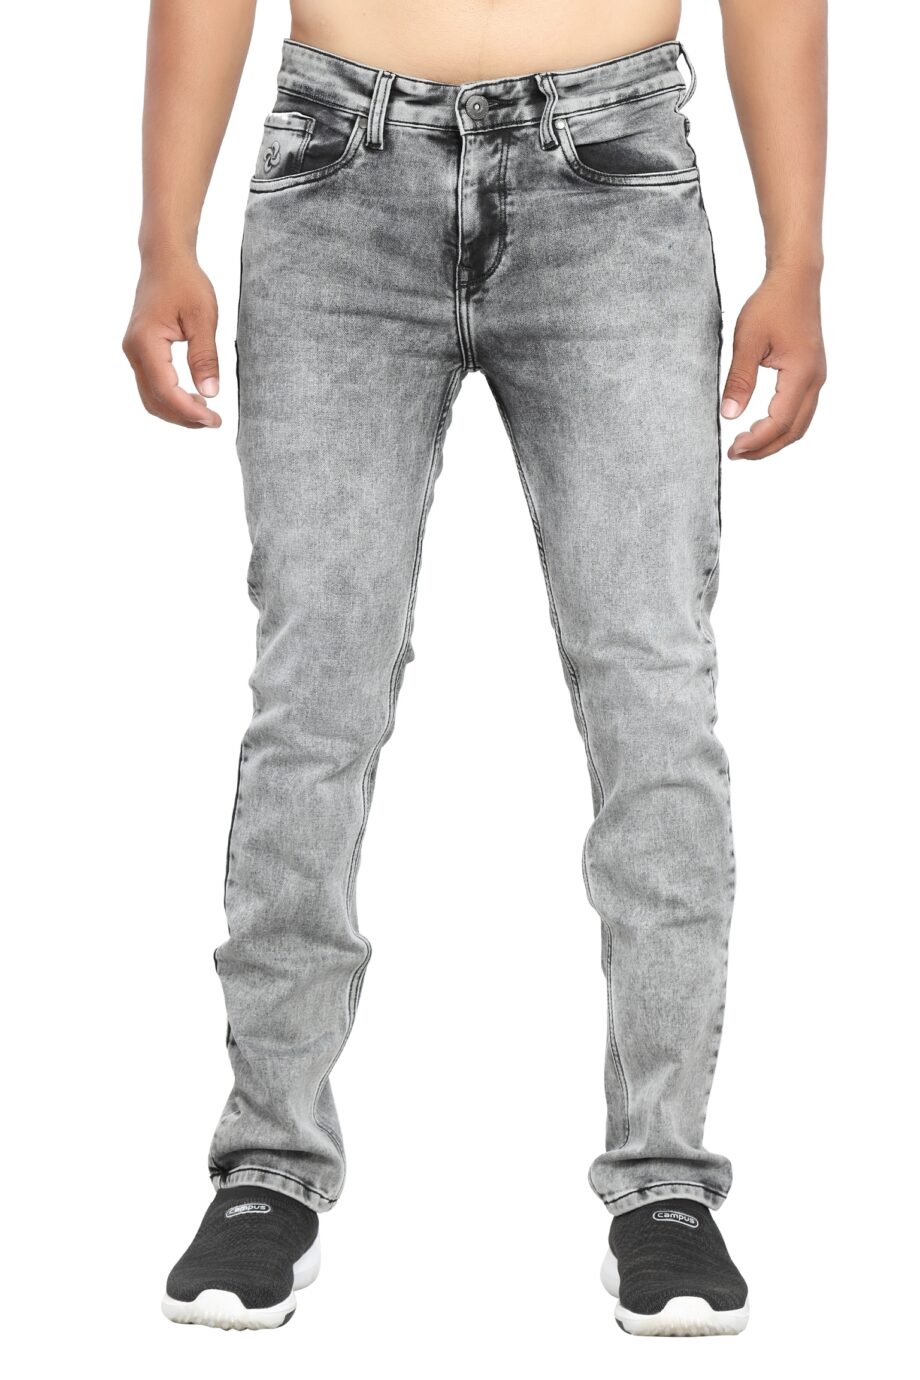 Stretchable branded Grey jeans pant for men